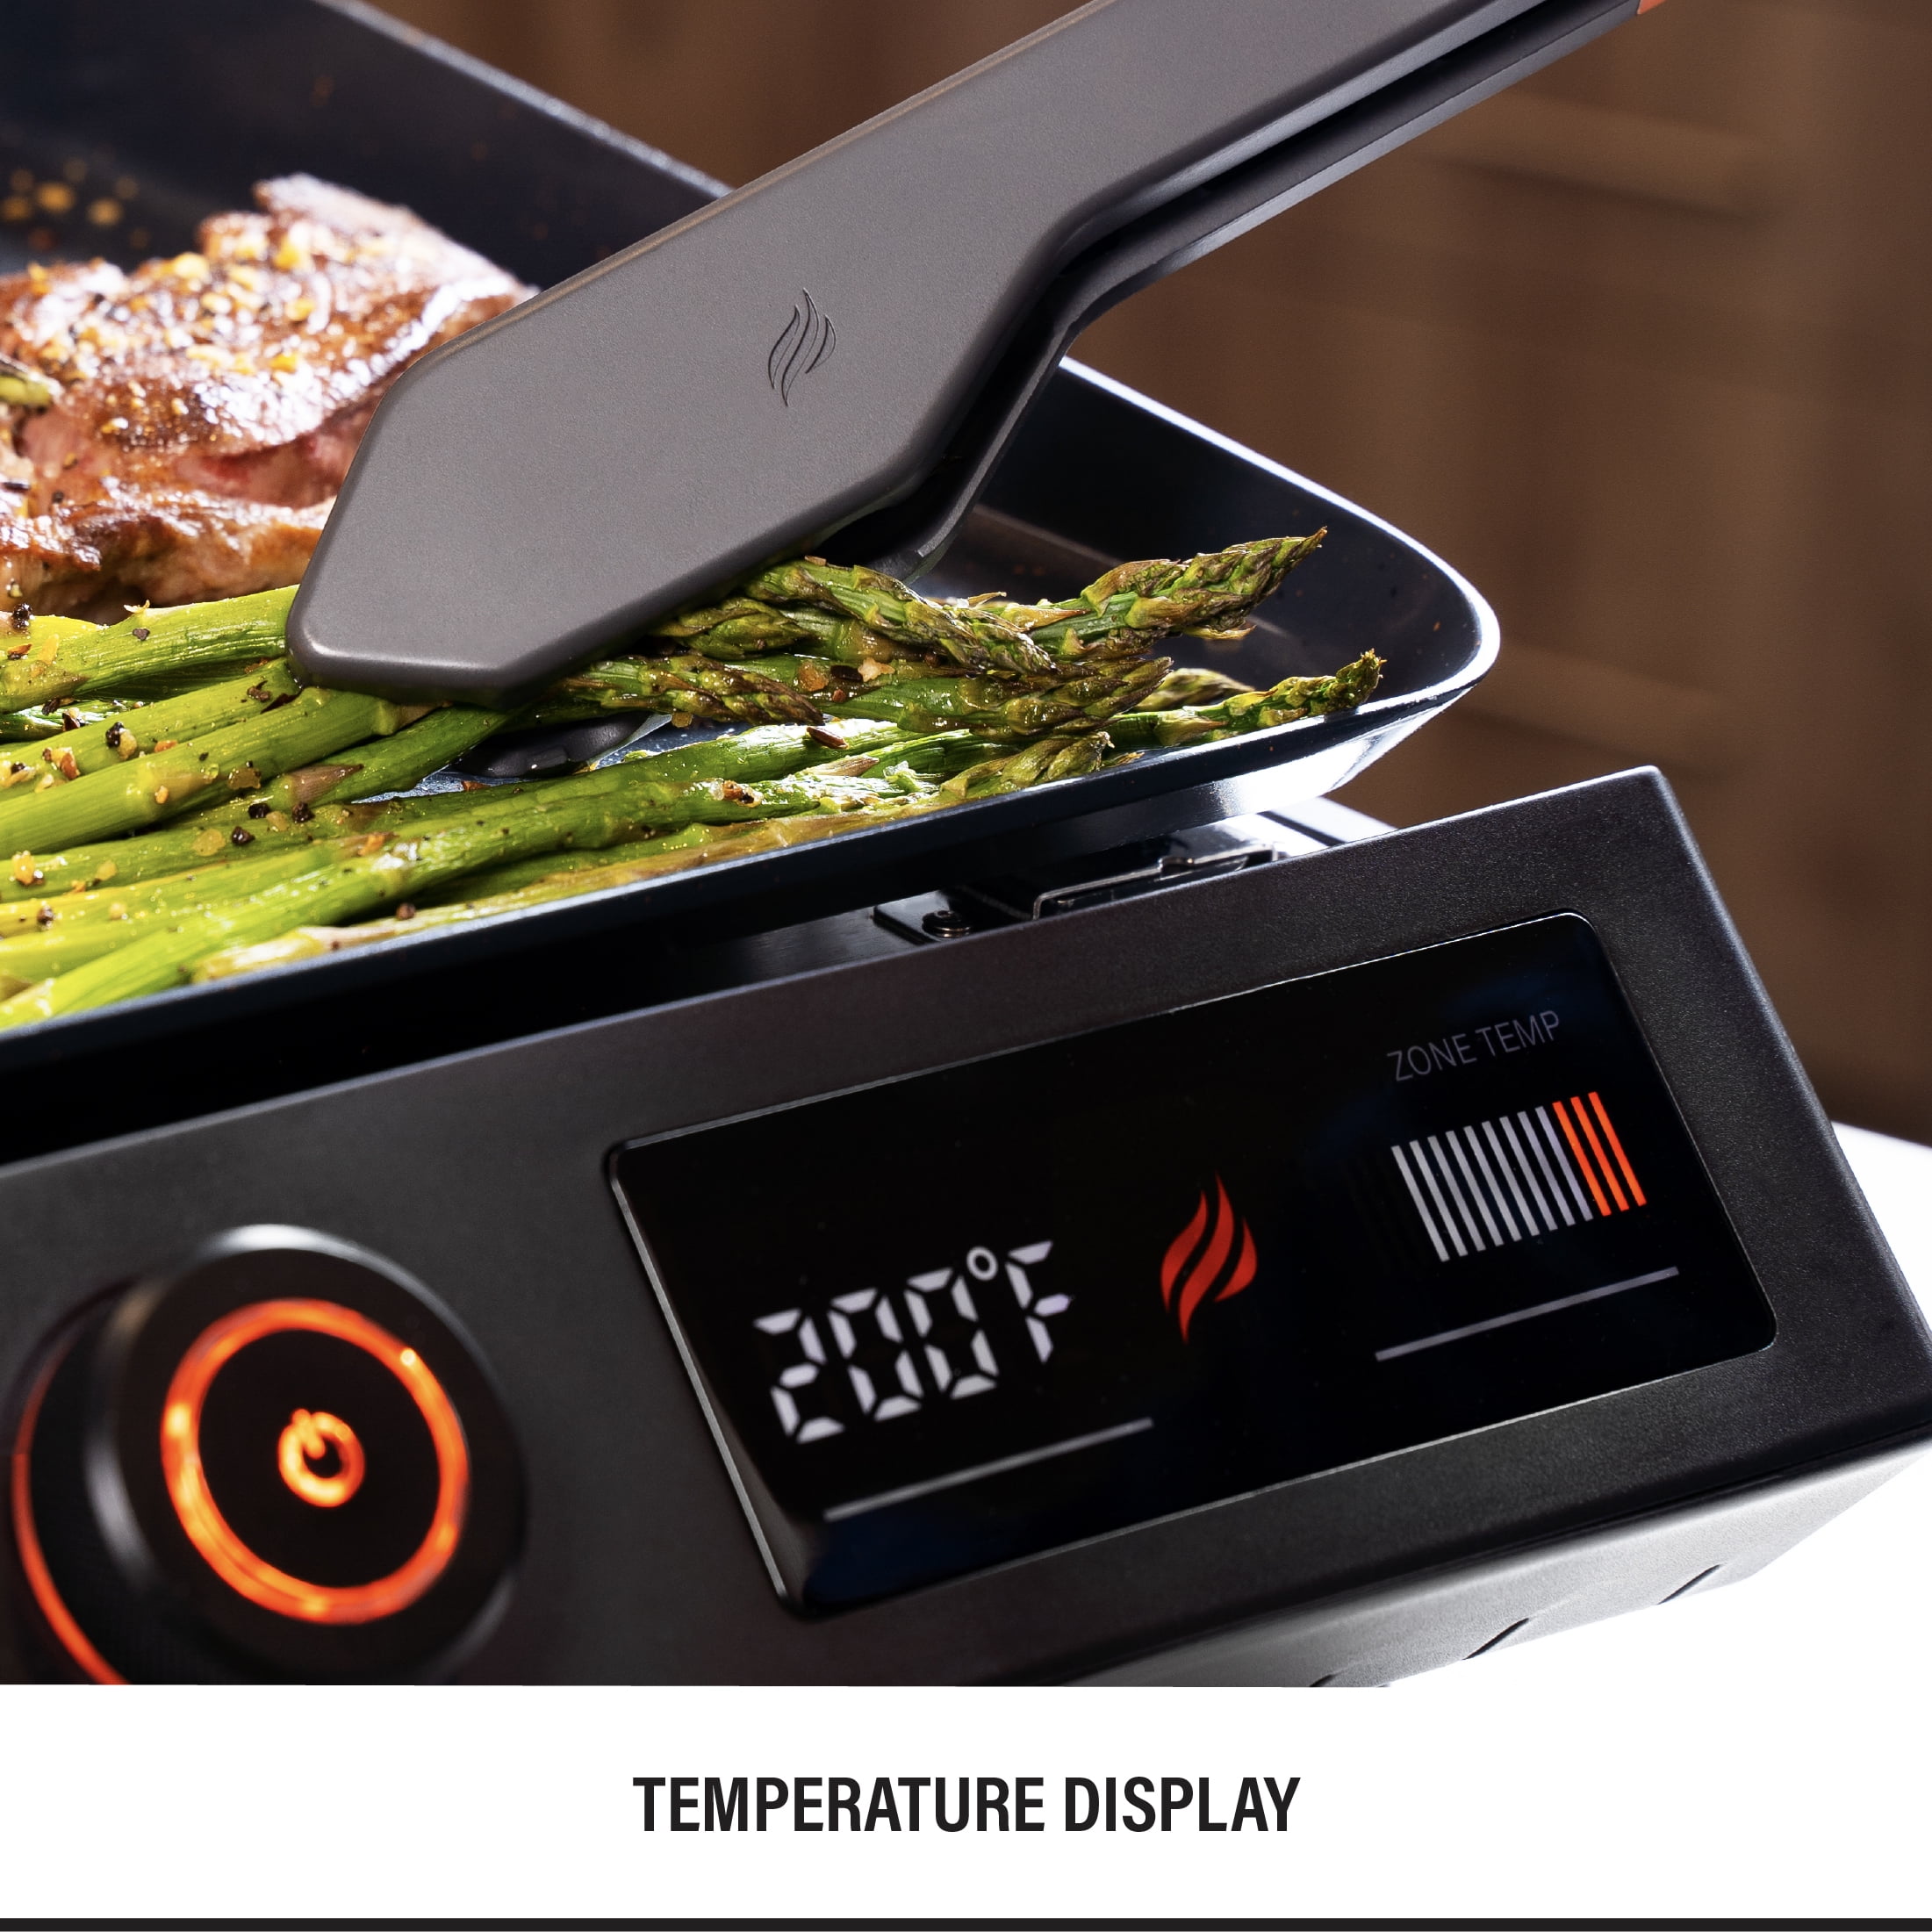 Blackstone E-Series 17 Electric Tabletop Griddle with Hood 